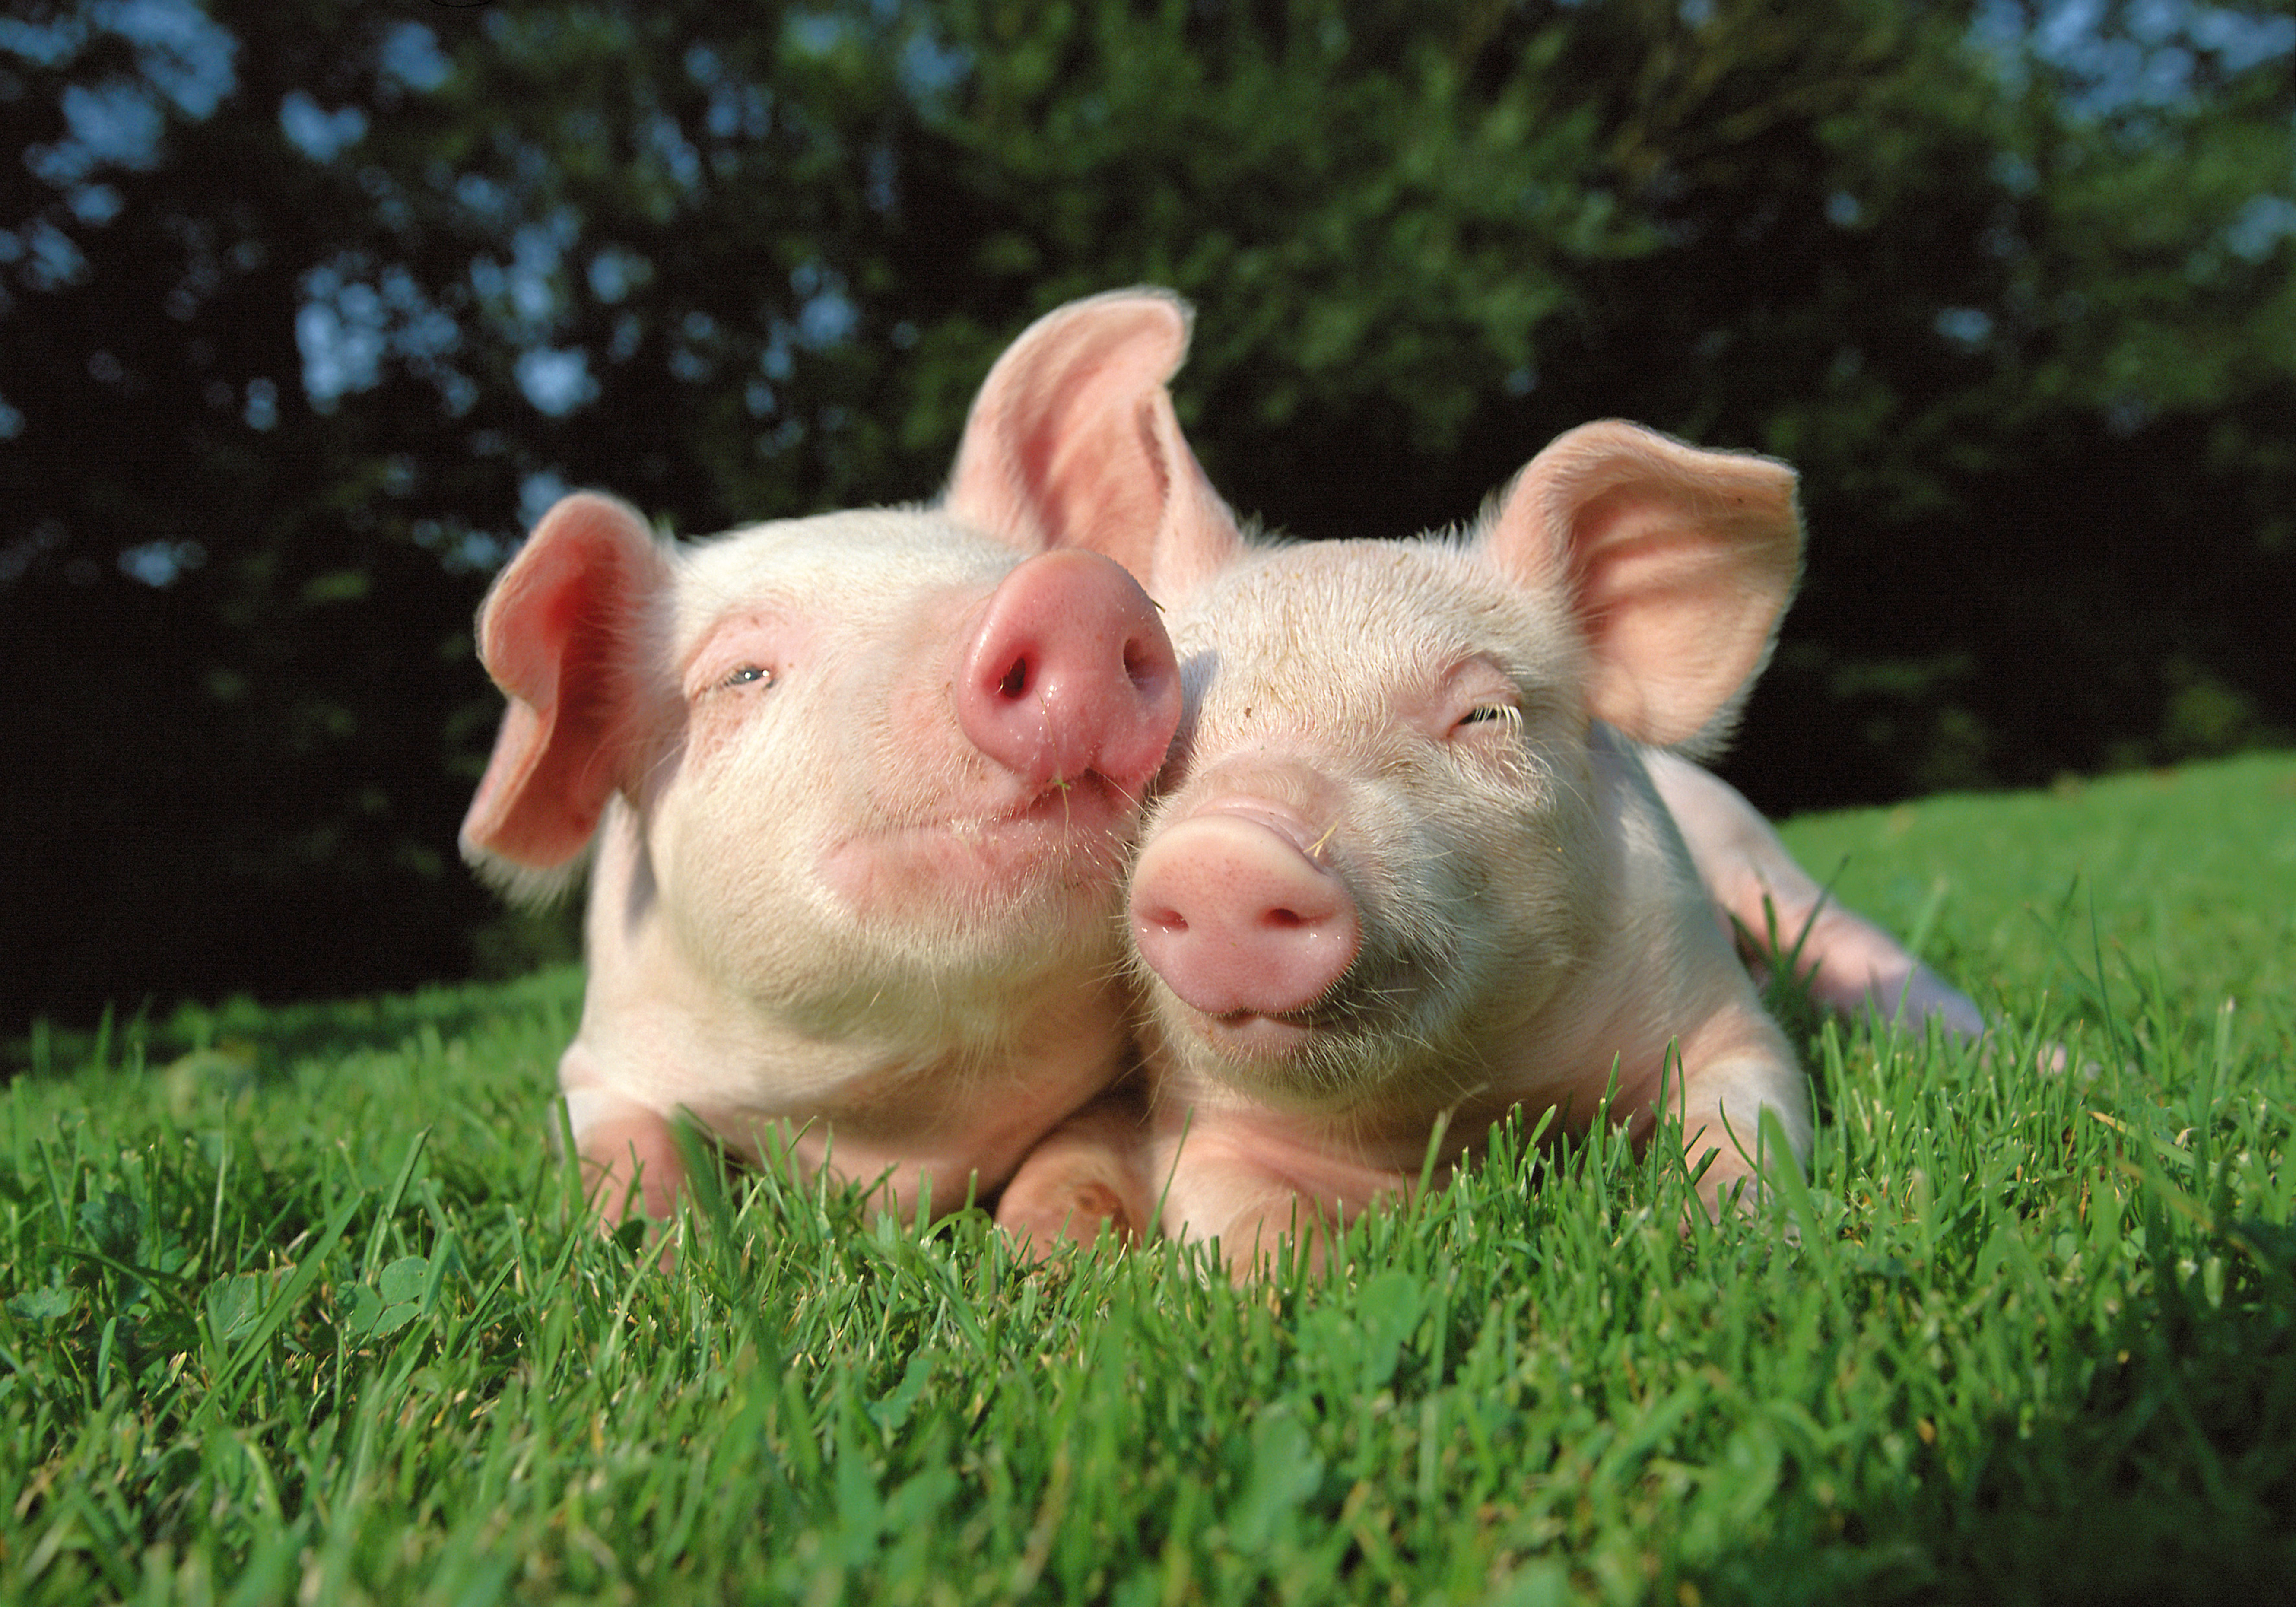 Cute pigs wallpapers and images - wallpapers, pictures, photos